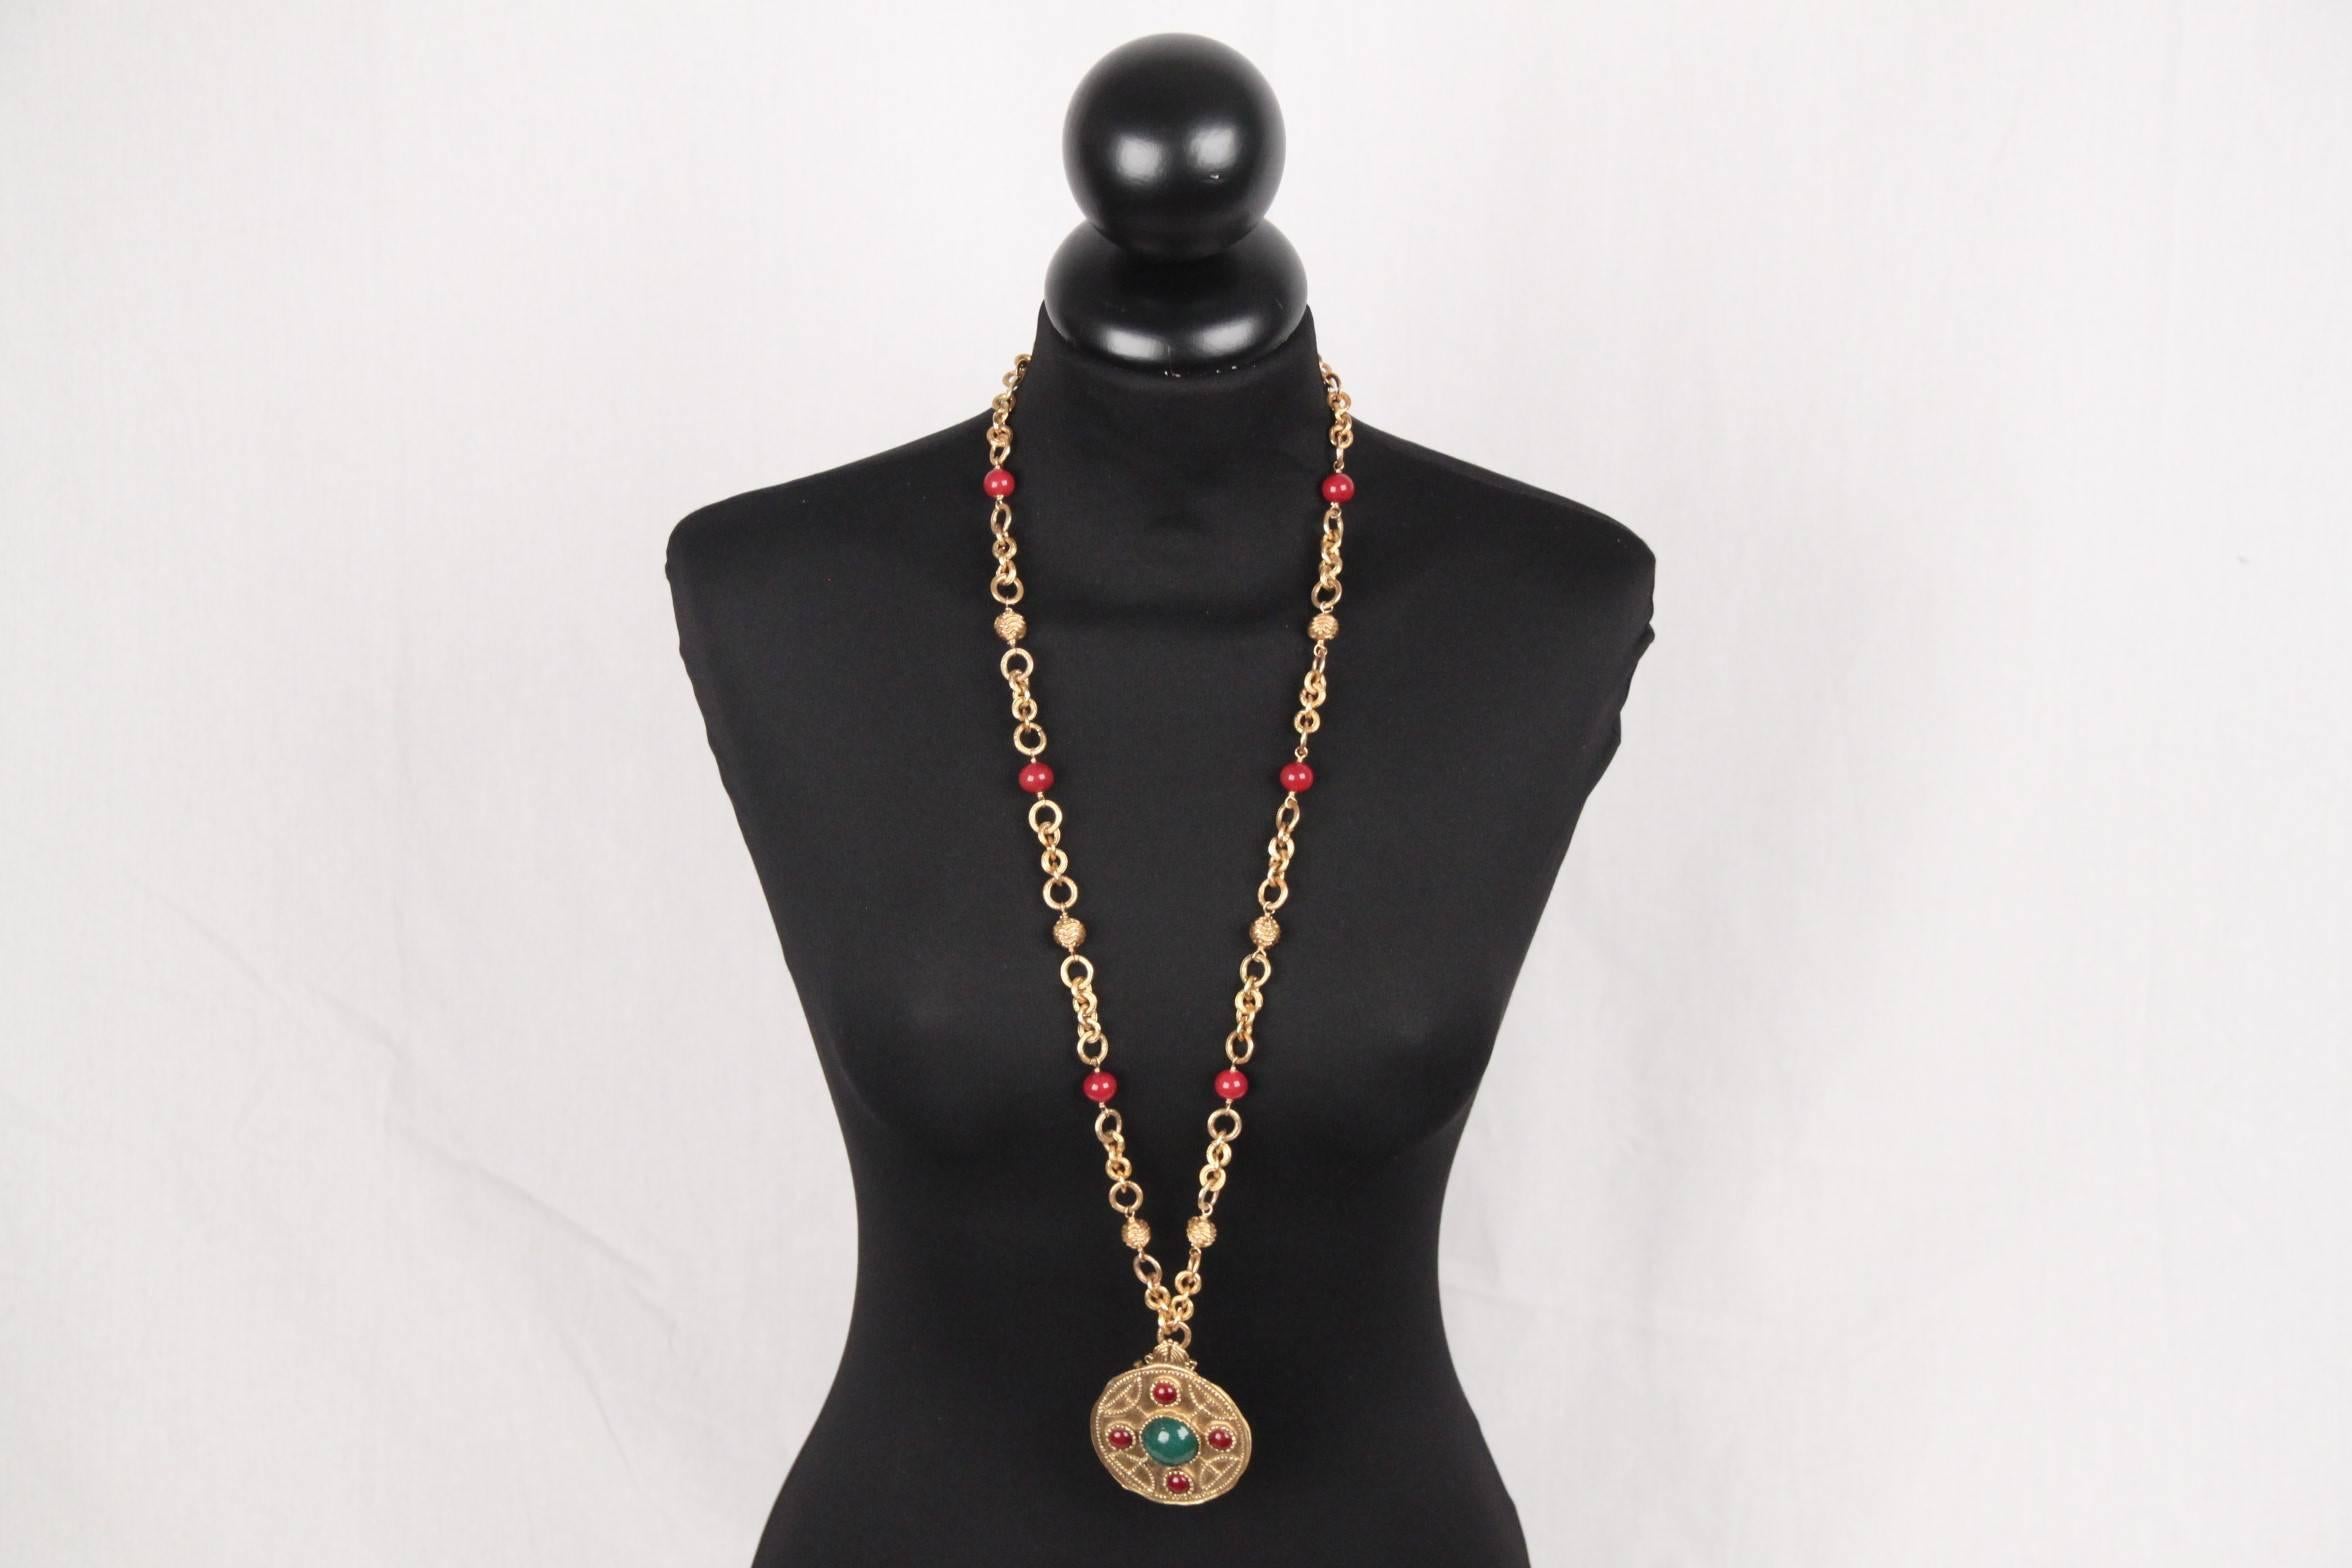 
- Period/ Era: Circa 1971-1980
- Long gold metal chain necklace featuring red round glass beads and chiseled gold balls
- 1 dangling round medallion pendant decorated with red & green cabochons
- The pendant can also be used as a brooch
-